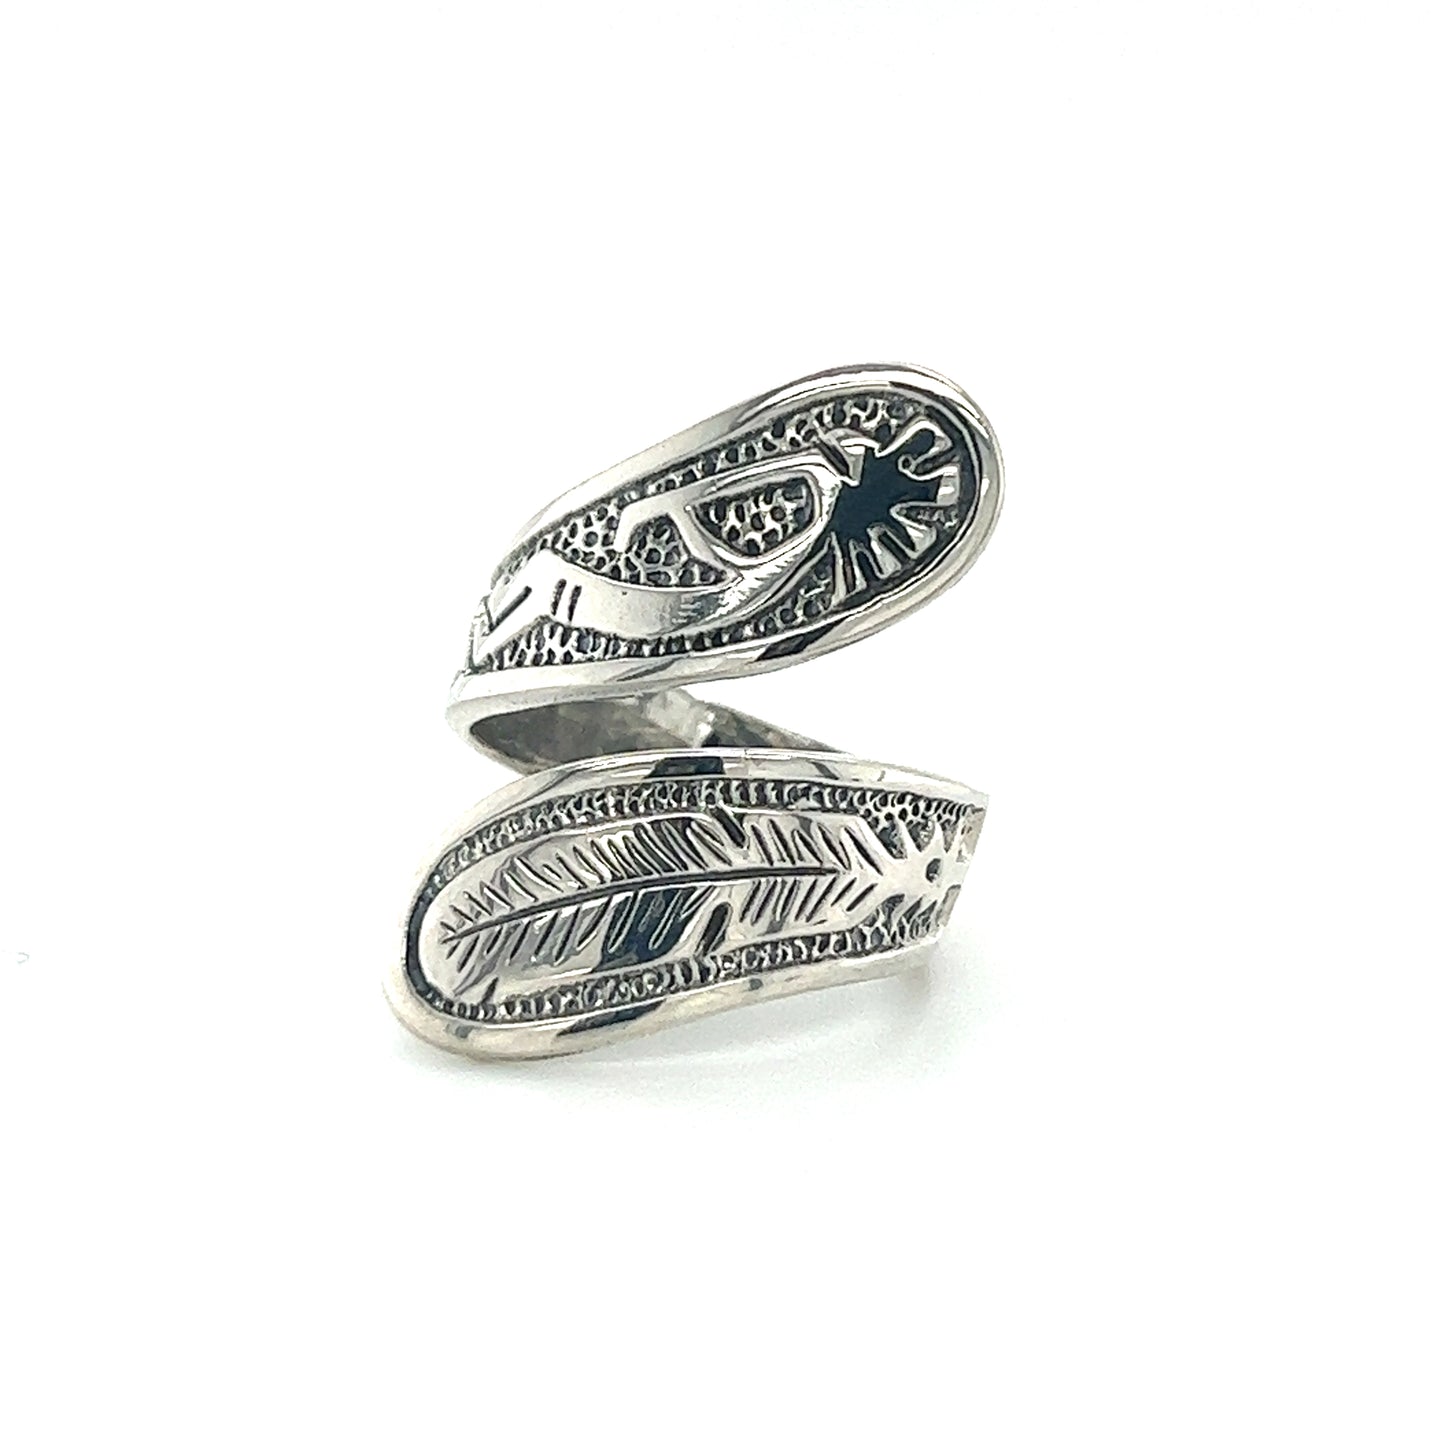 An adjustable Super Silver Kokopelli and Feather Wrap Ring, inspired by the Southwest and featuring a feather motif.